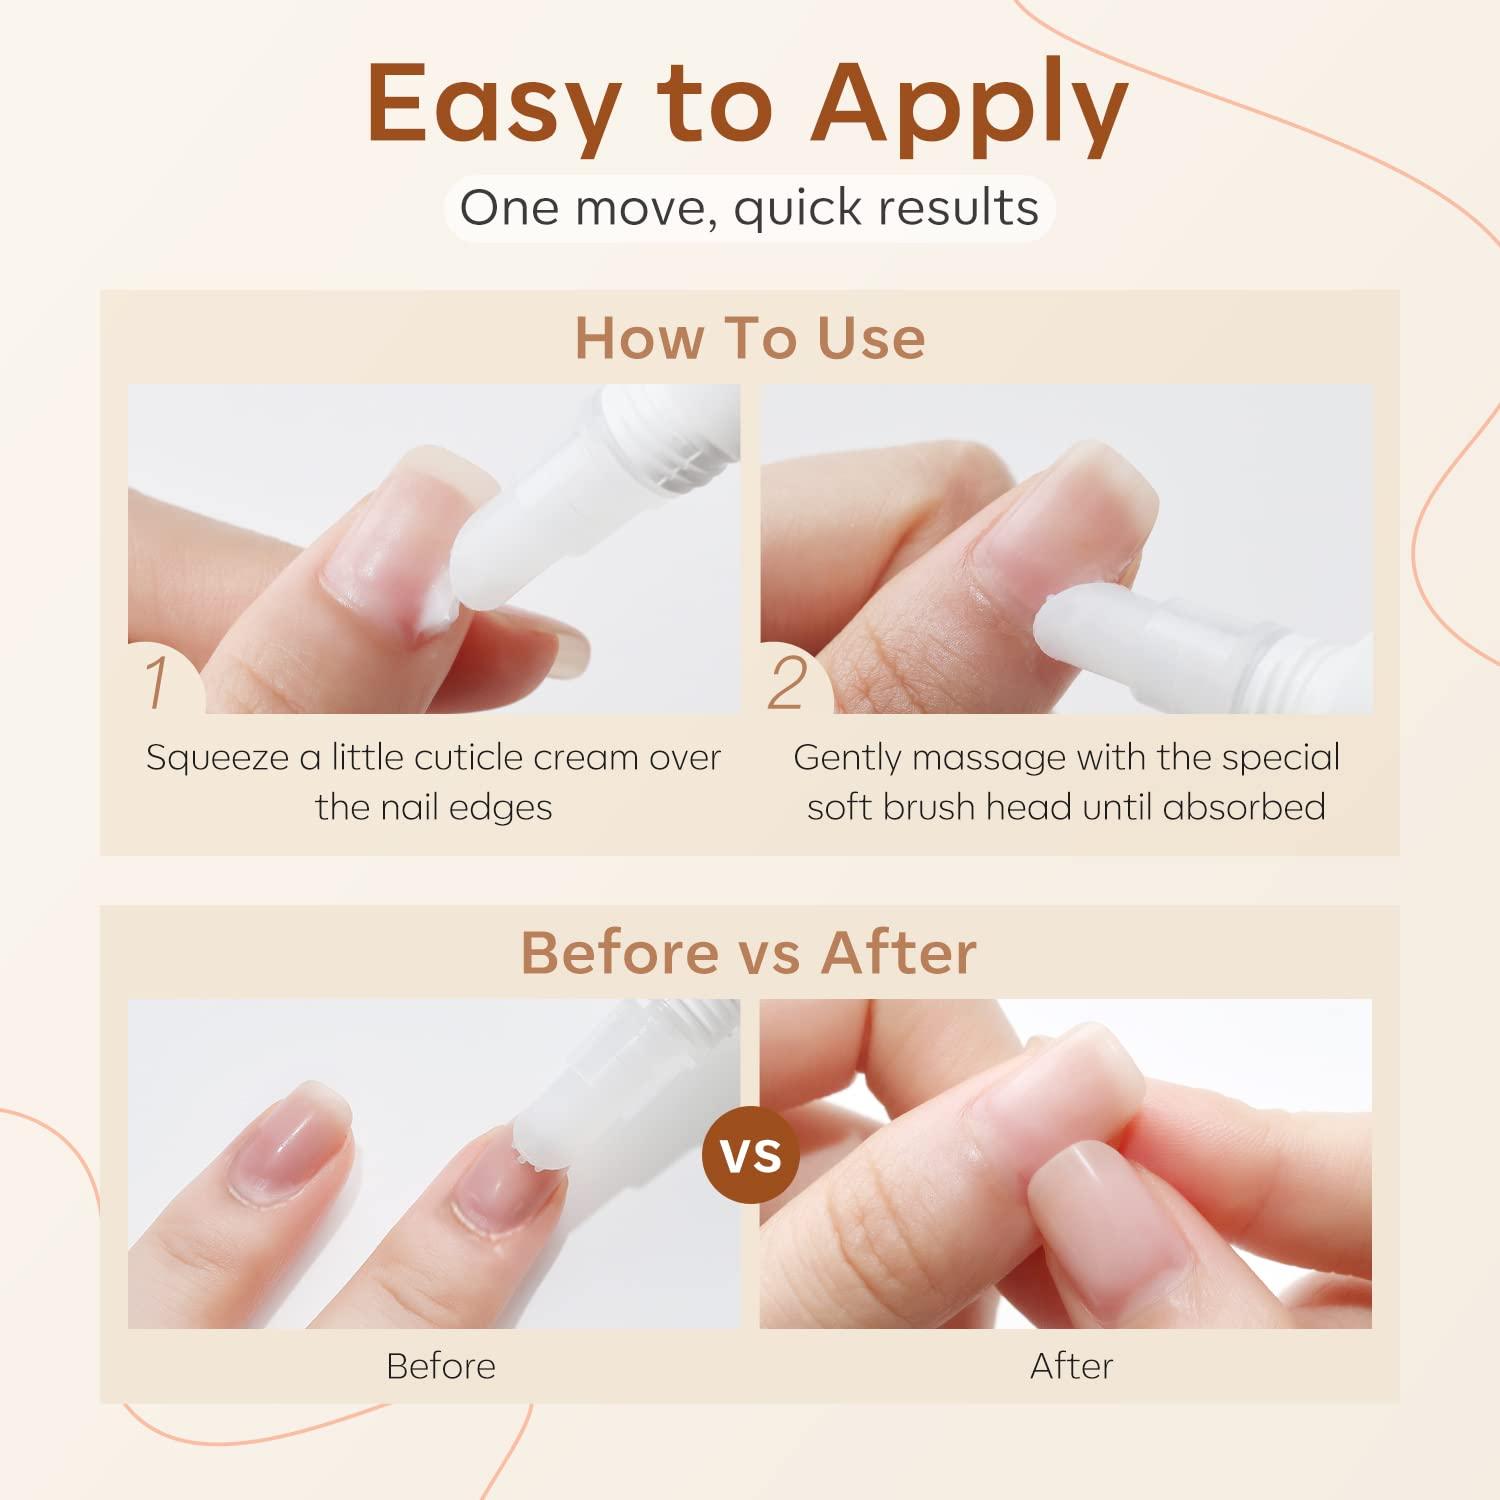 Cuticle creams for healthy, strong, chip-free nails - Times of India